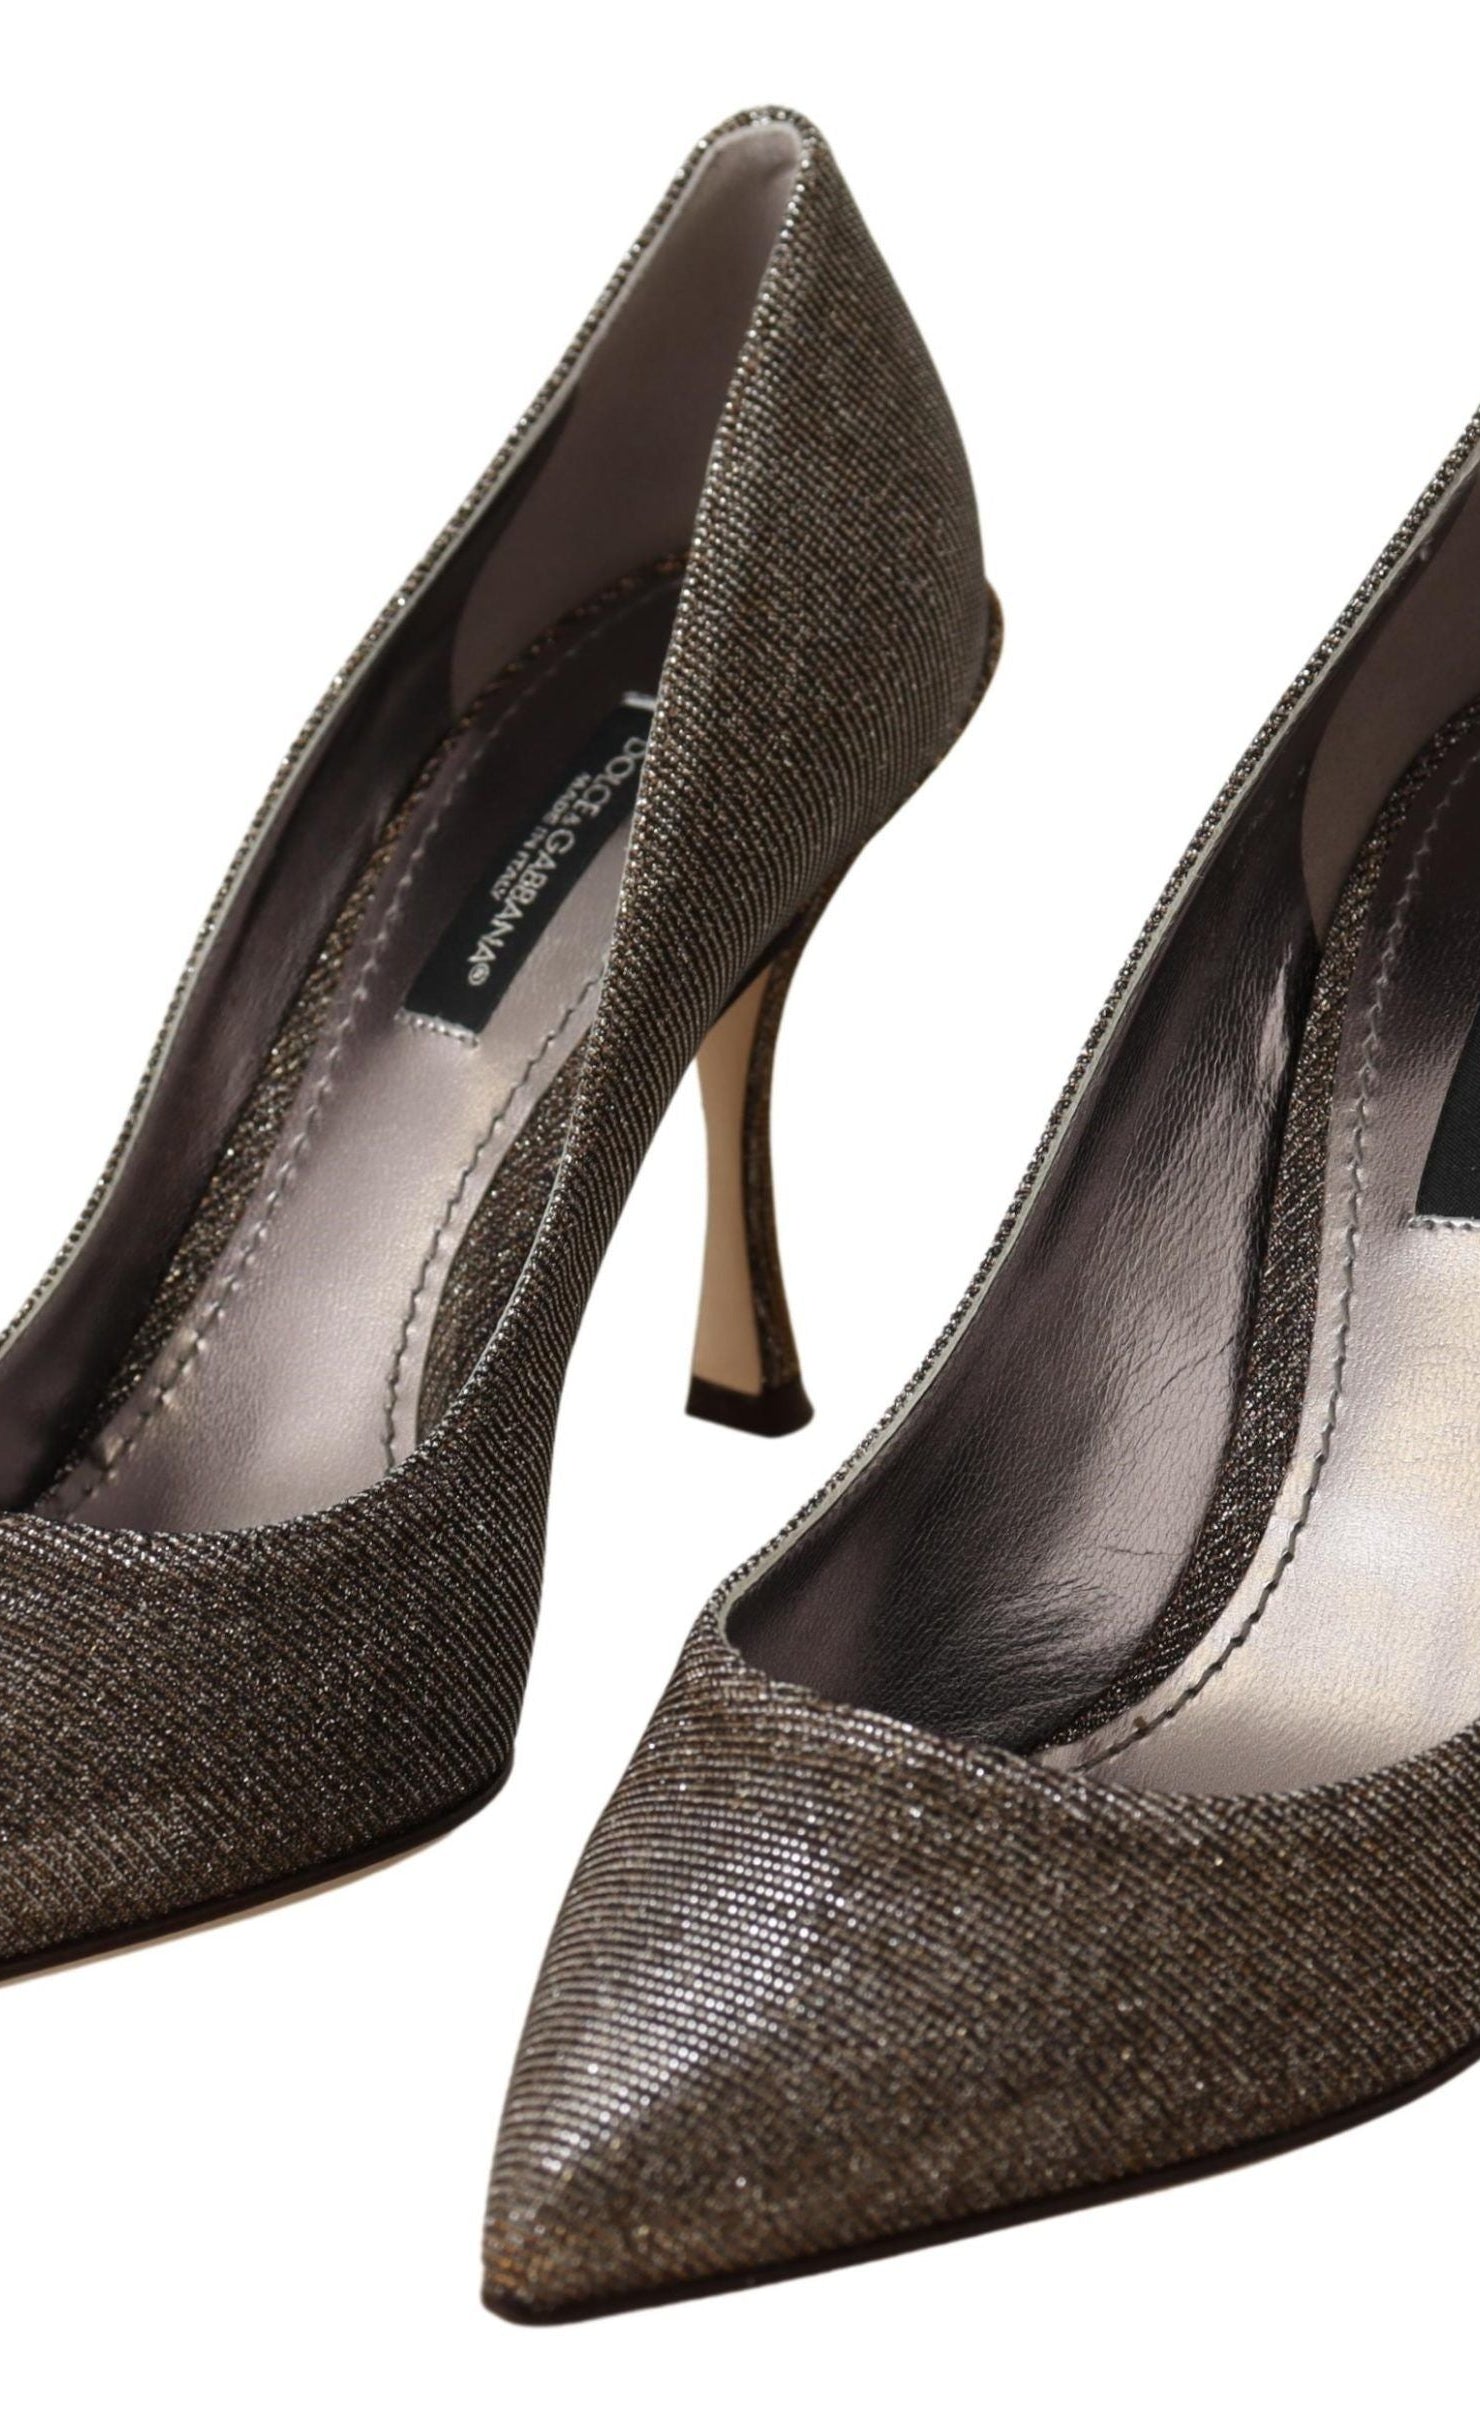 Dolce & Gabbana Gold Silver Fabric Heels Pumps Shoes GENUINE AUTHENTIC BRAND LLC